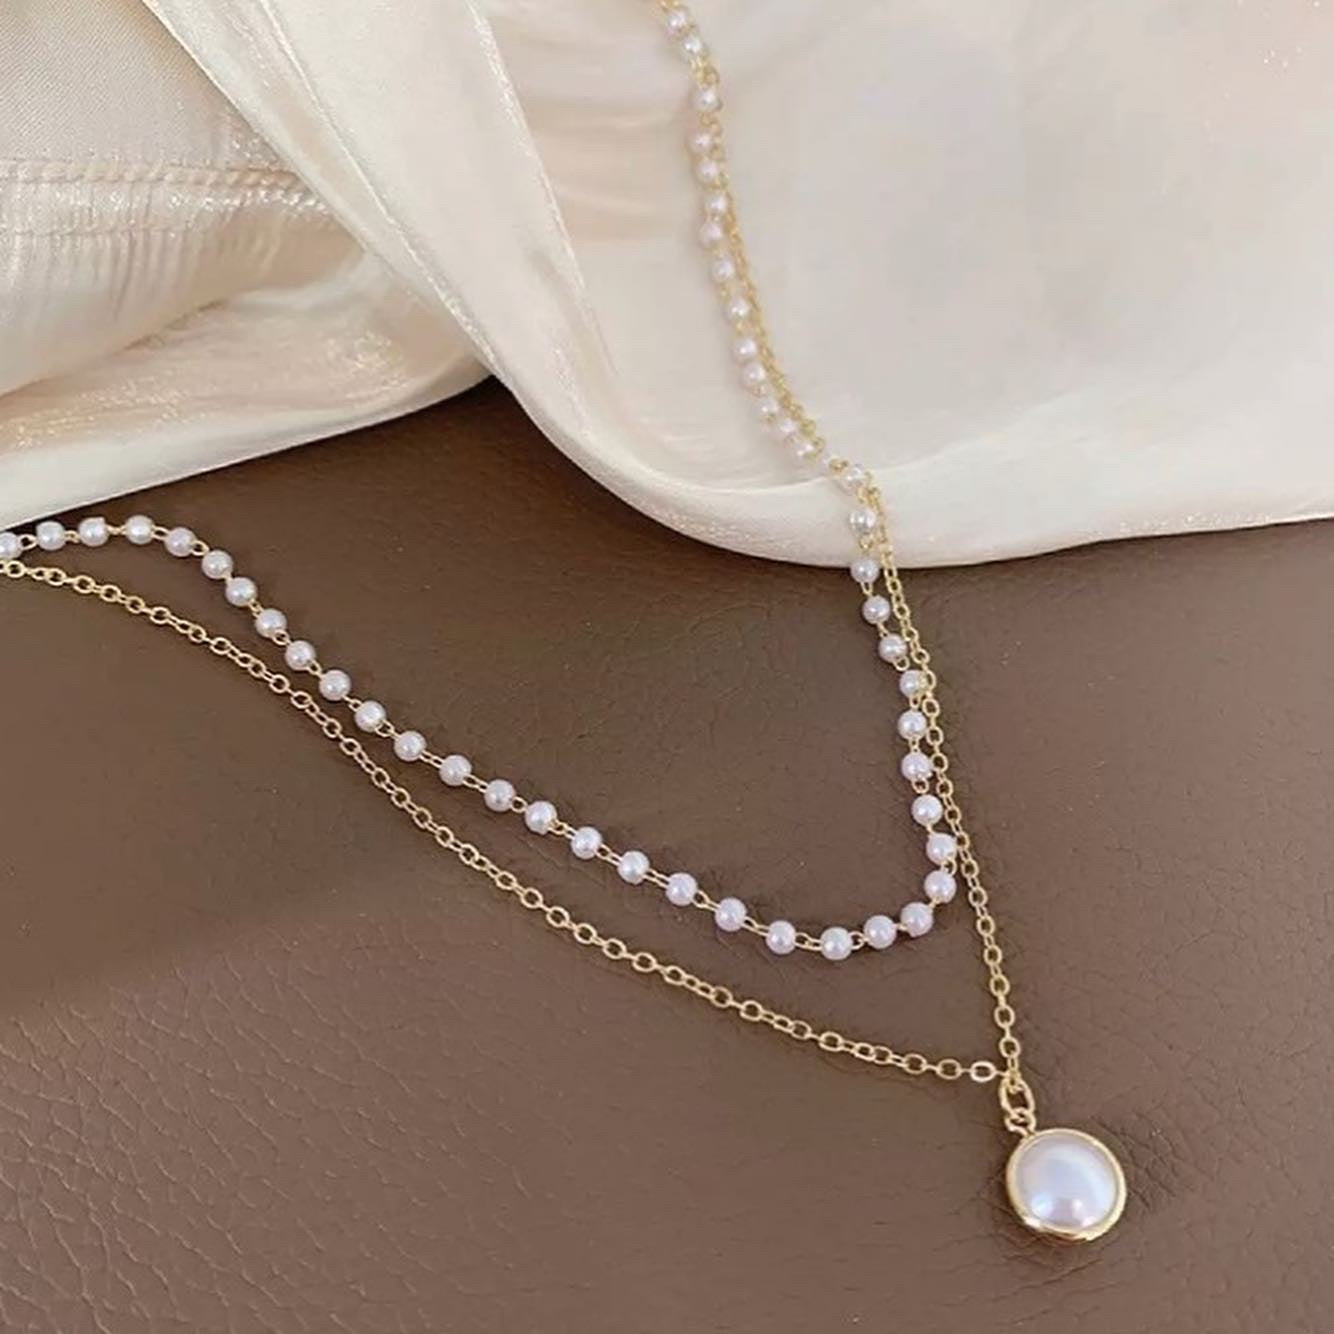 Vintage Simple Double Layer Pearl Necklace Women Fashion Lock Bone Chain Necklace